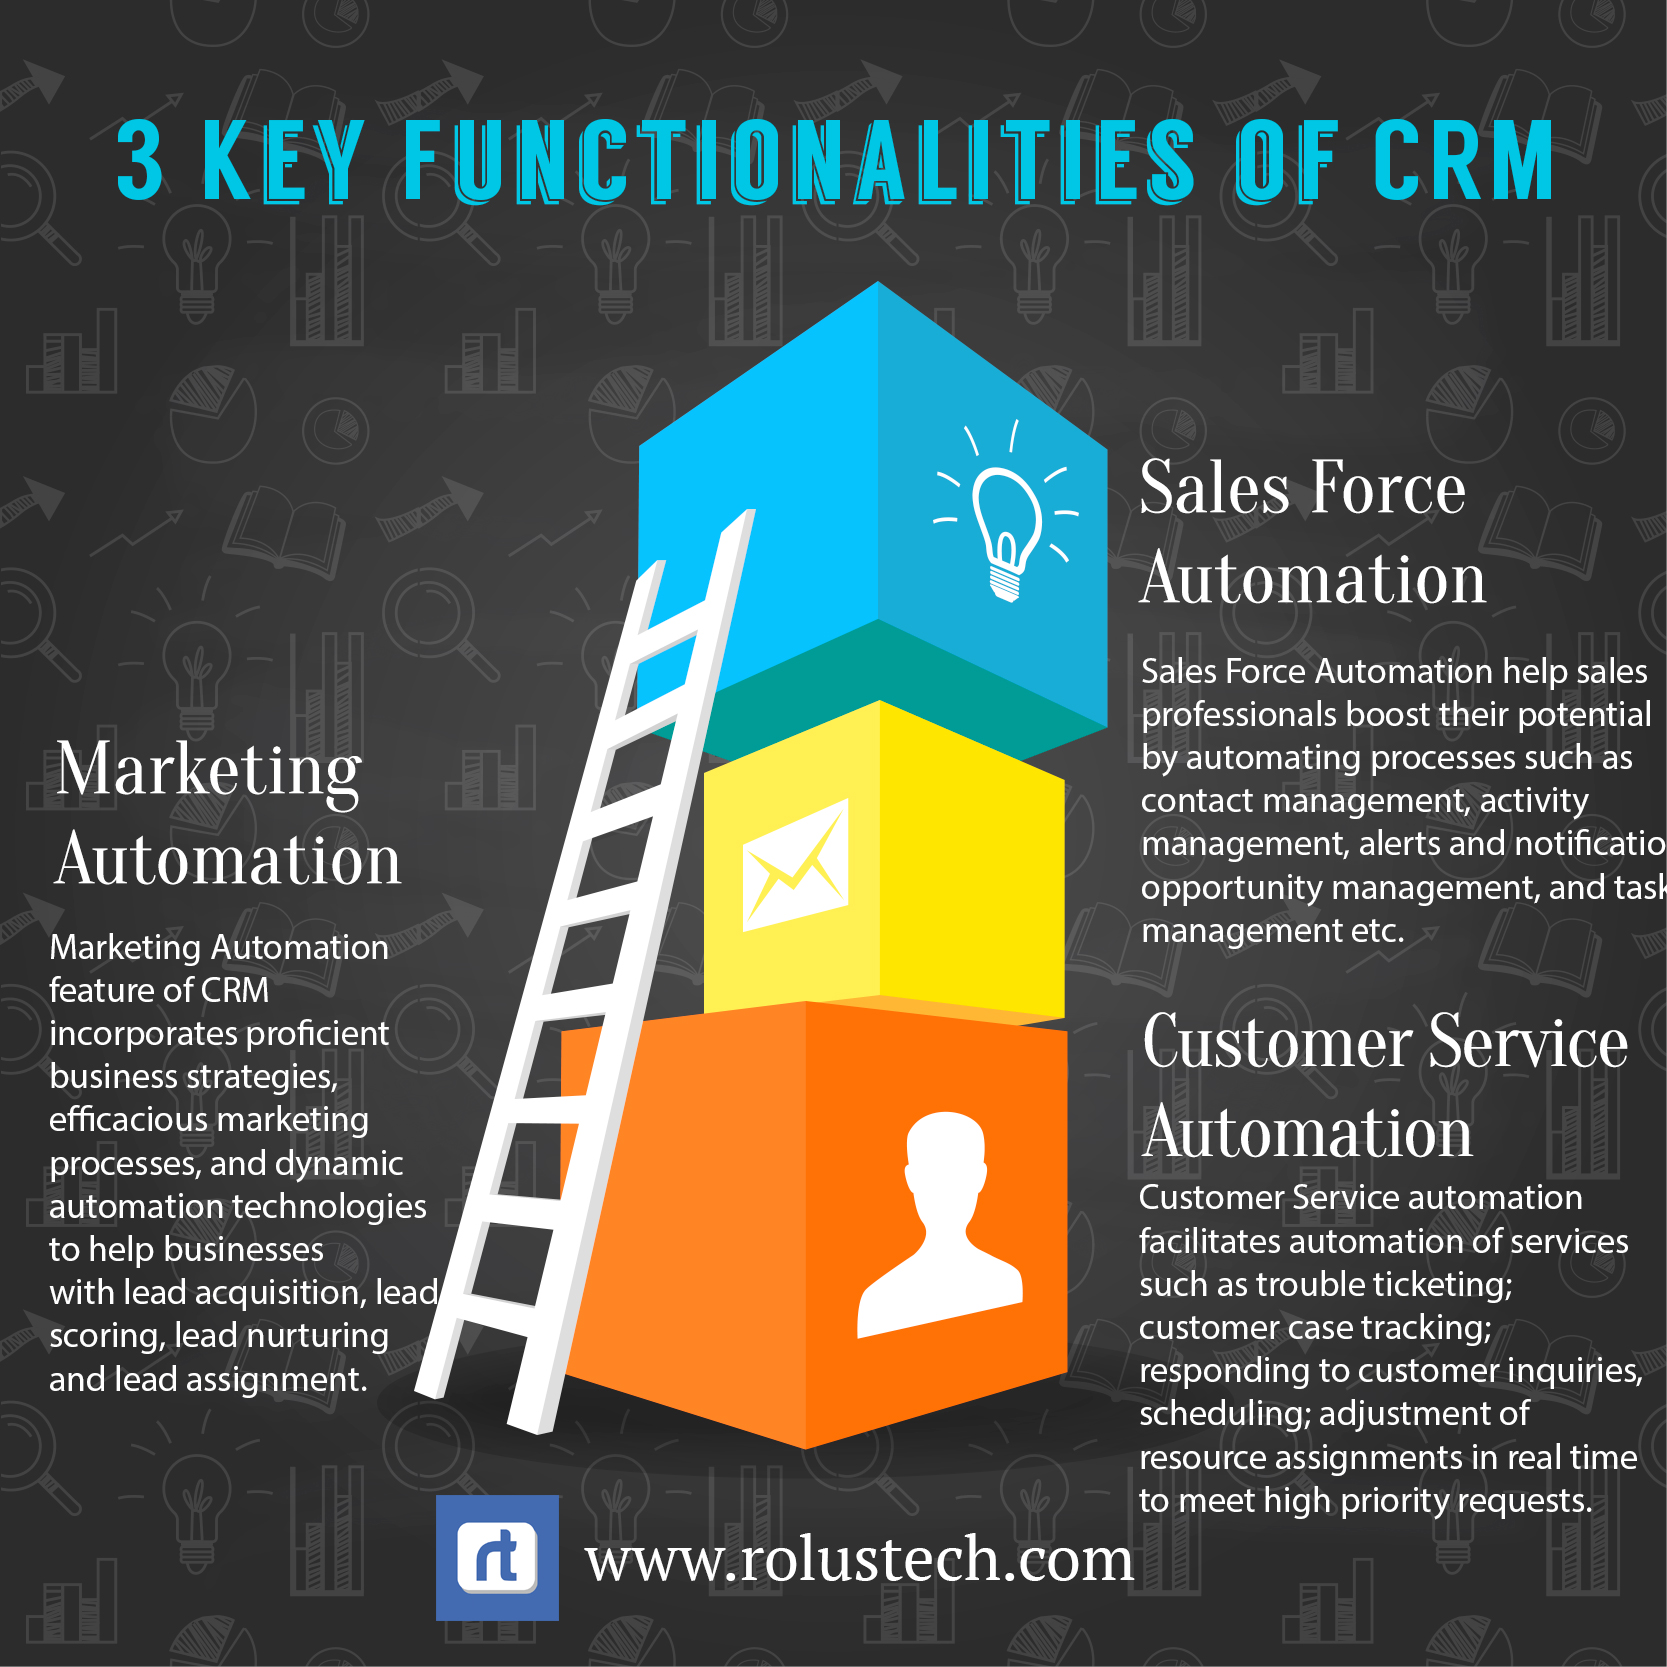 Functions of CRM CRM Functionalities Which Help Your Business Grow!